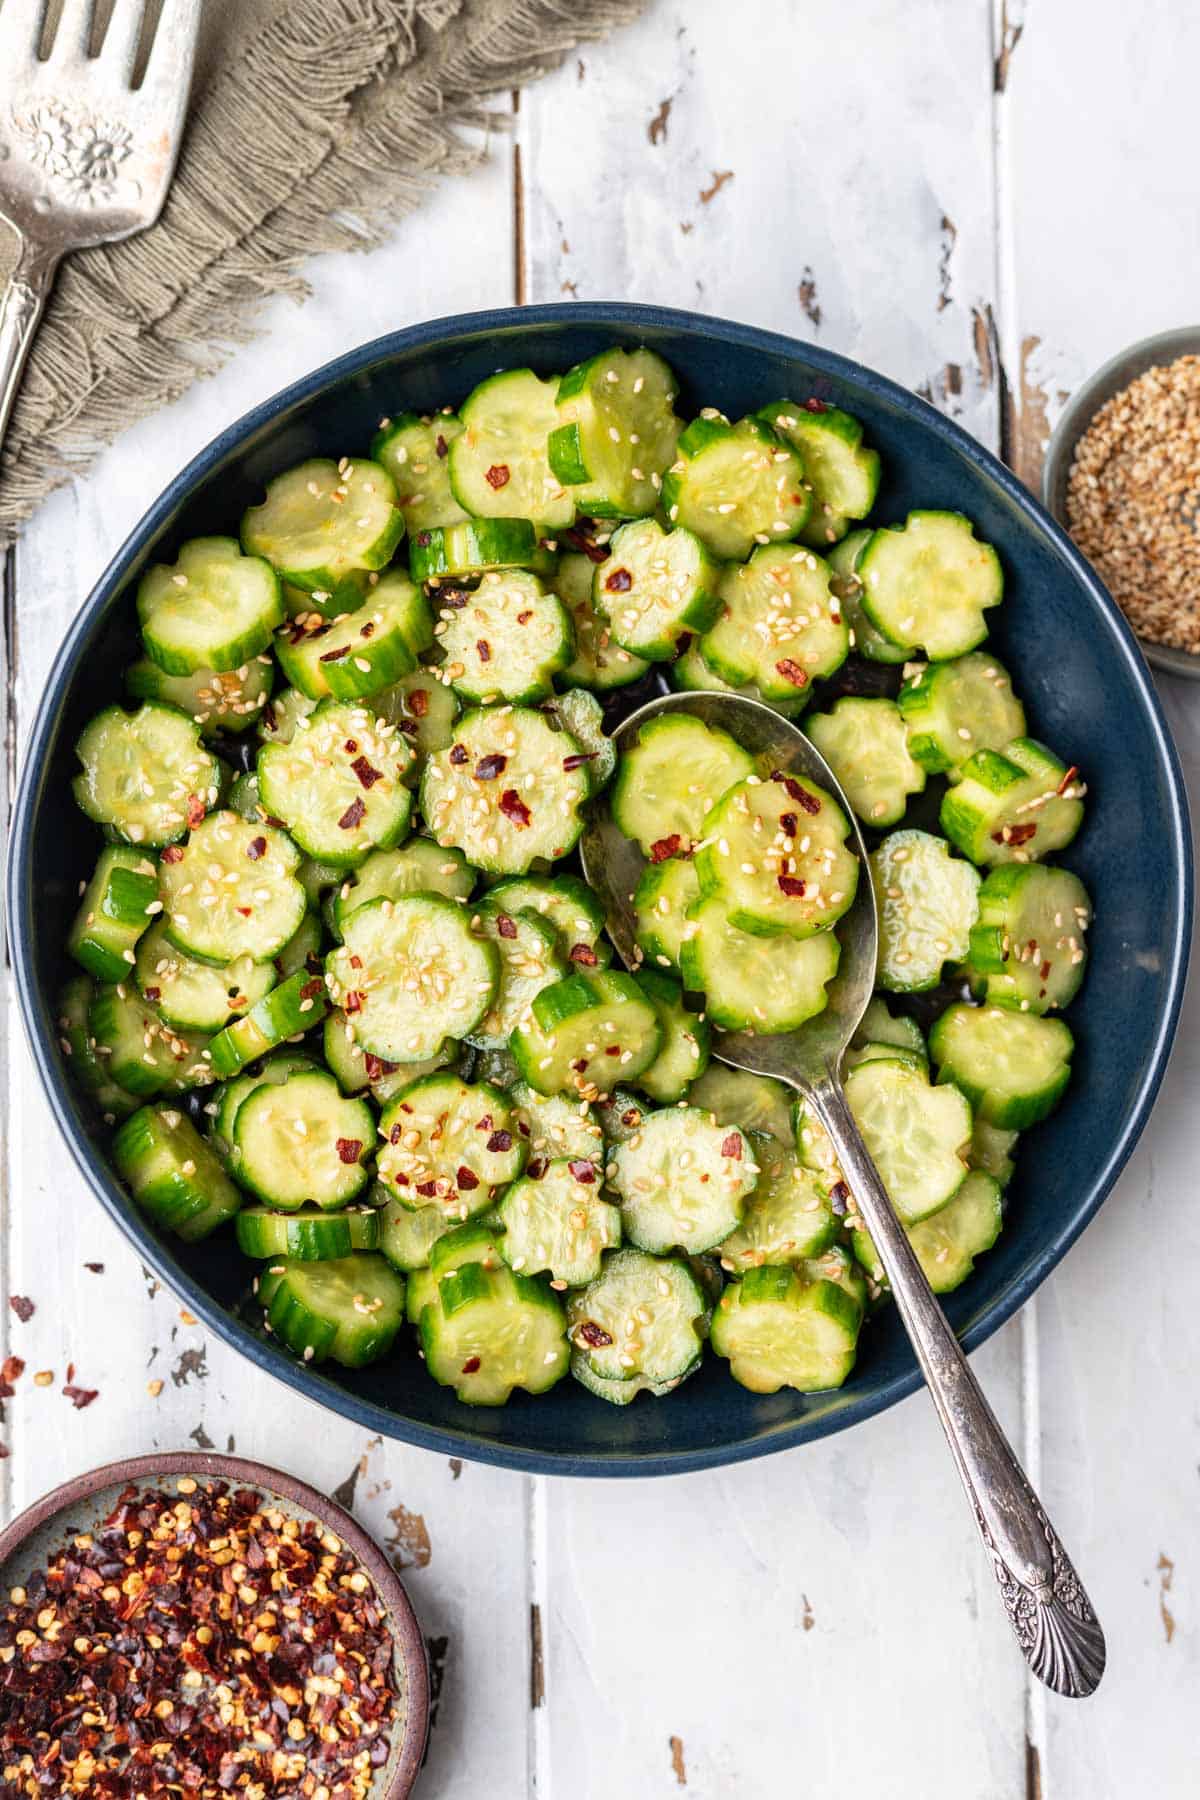 Spicy cucumber salad in a blue serving bowl with a spoon.